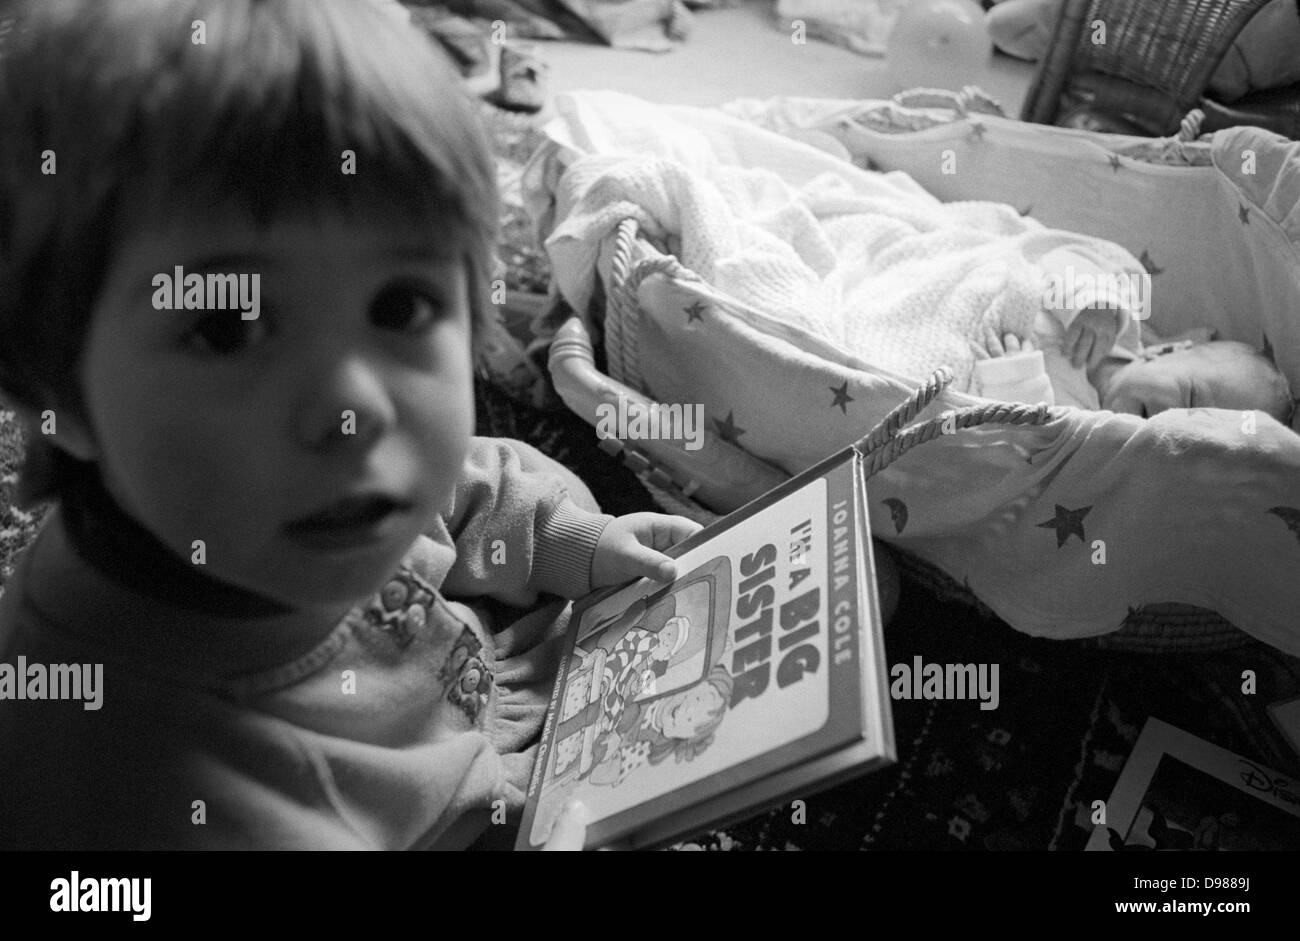 A 2 year-old girl reads a book about being a big sister, coming to terms with role-play, the idea of having a newborn baby brother in his basket at home in south London. The siblings are in their south London home, the girl sitting up on the carpet and her brother - only a few weeks old - is starting to wake from a mid-morning sleep. The book being read is 'I'm a big sister' by writer Joanna Cole, written to help young girl's overcome the shock of suddenly no longer being the most important member of a young family, helping her deal with a new status as the eldest but more mature child. Stock Photo